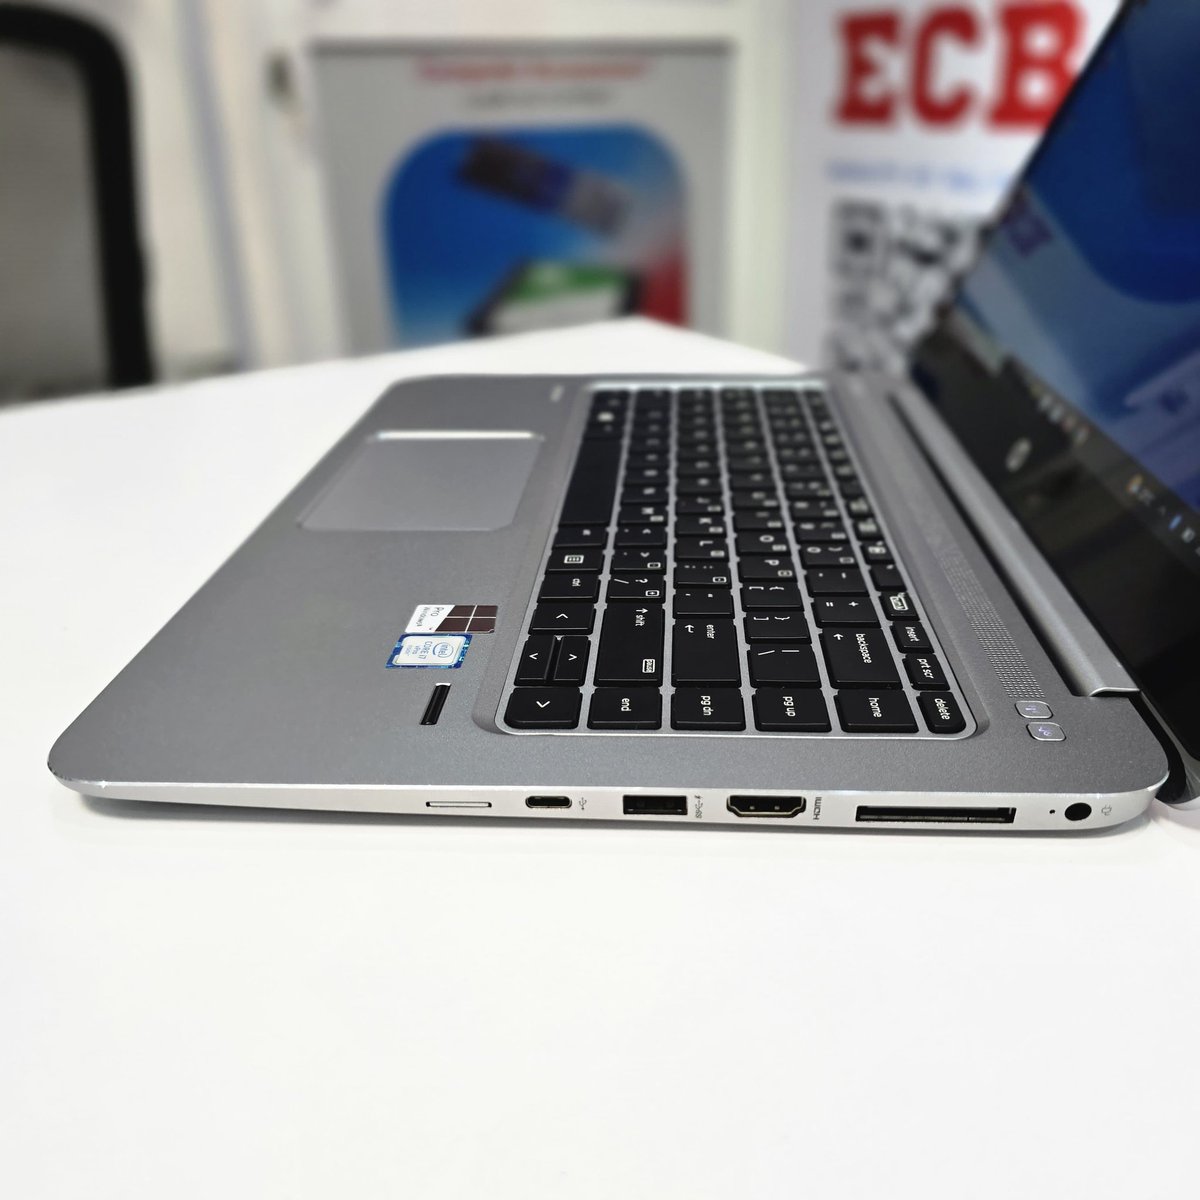 HP EliteBook 1040 touchscreen laptop is equipped with a 6th generation Intel Core i7 processor, 8GB RAM, and a 256GB SSD.
With a base speed of 2.8GHz and a 14-inch full HD display, it offers a good balance of power and portability. The inclusion of USB, HDMI, and Type-C ports…